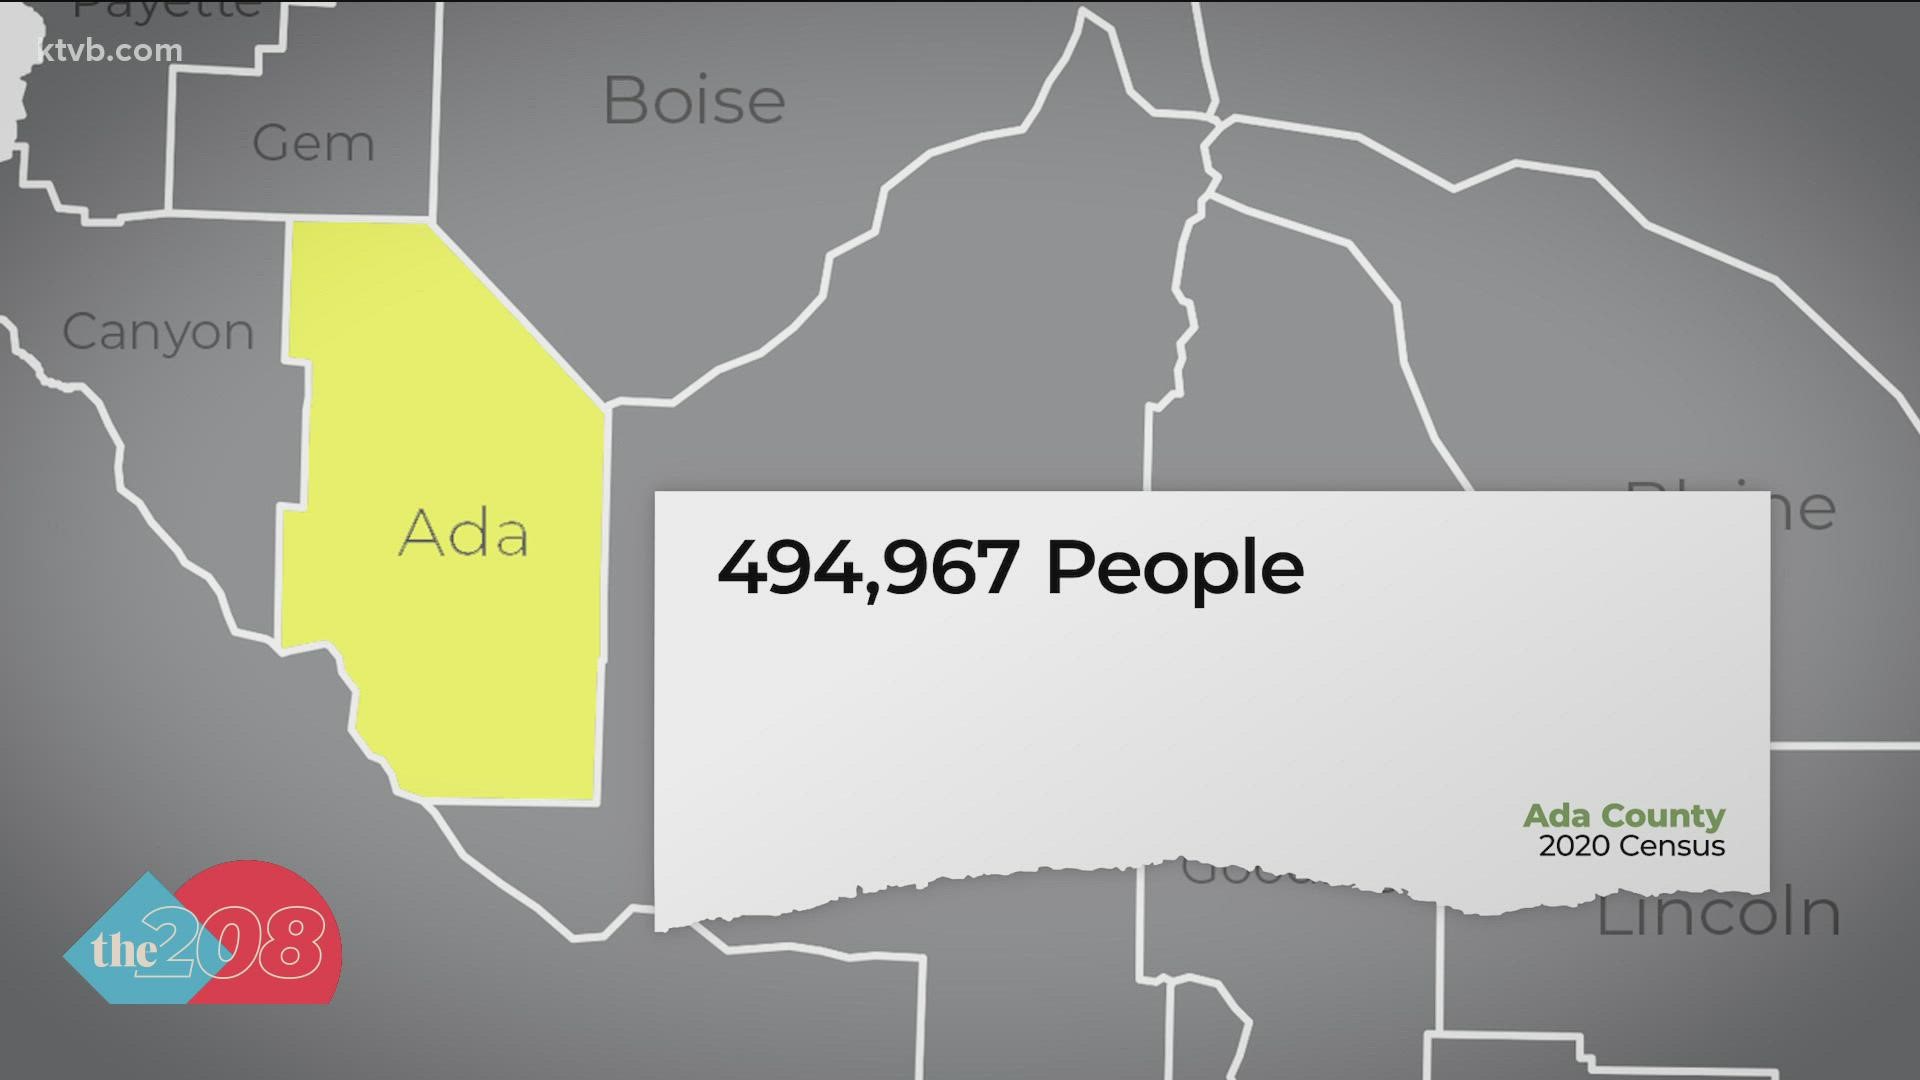 The state of Idaho's population growth over the past decade ranks second in the nation, just behind the neighboring state of Utah.